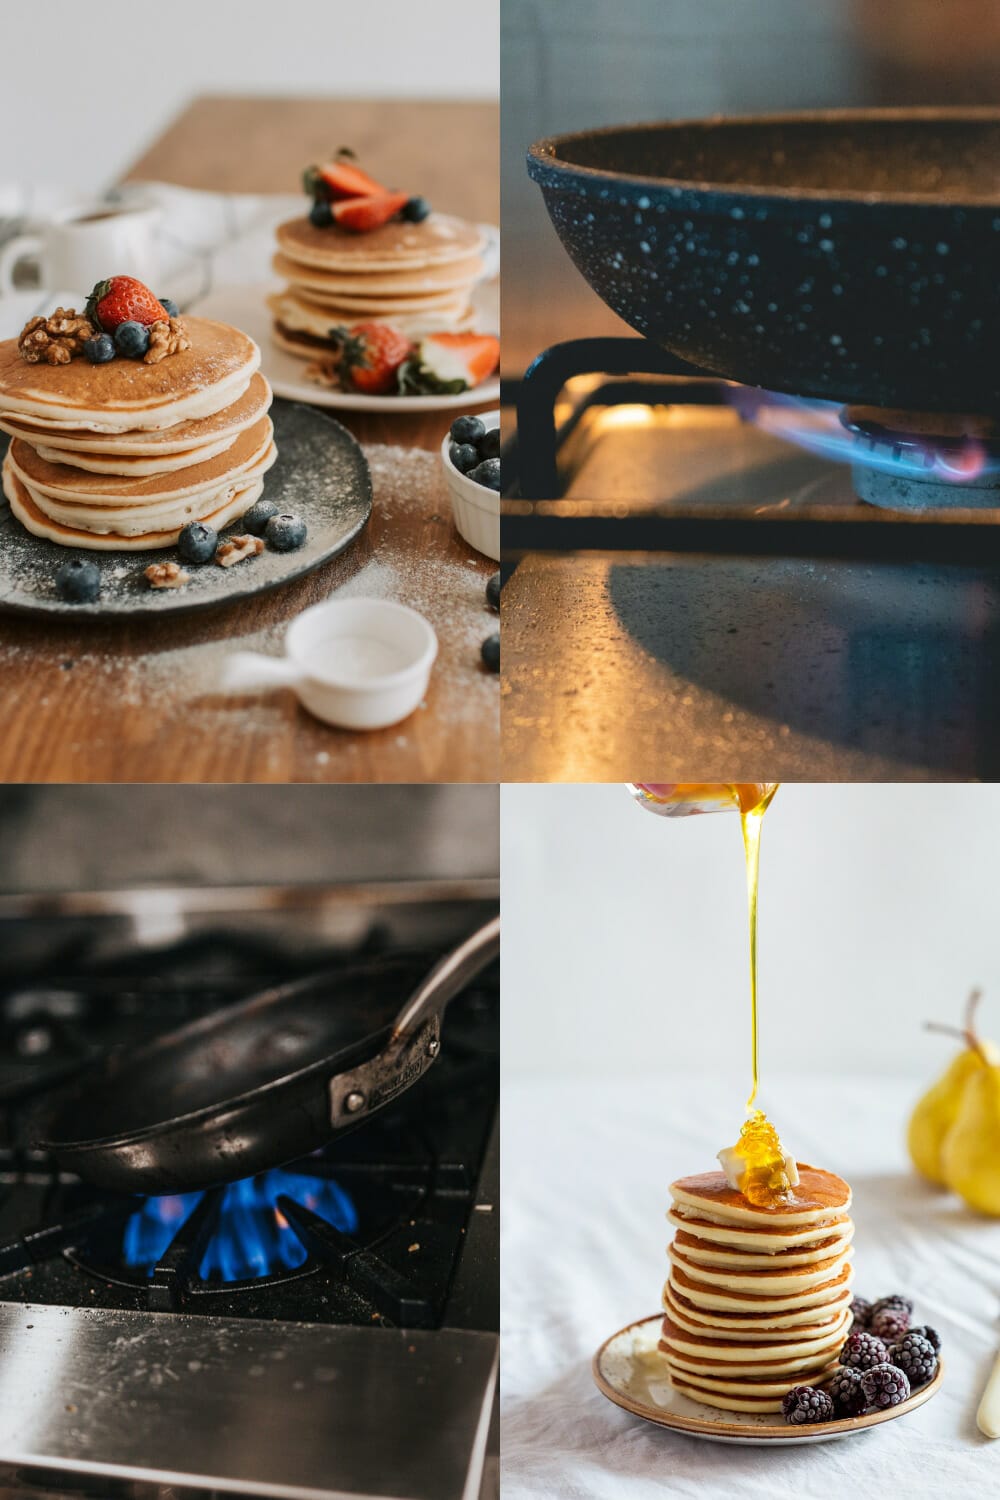 Help! My pancakes are sticking to the pan: 5 Easy Solutions via @nofusskitchen